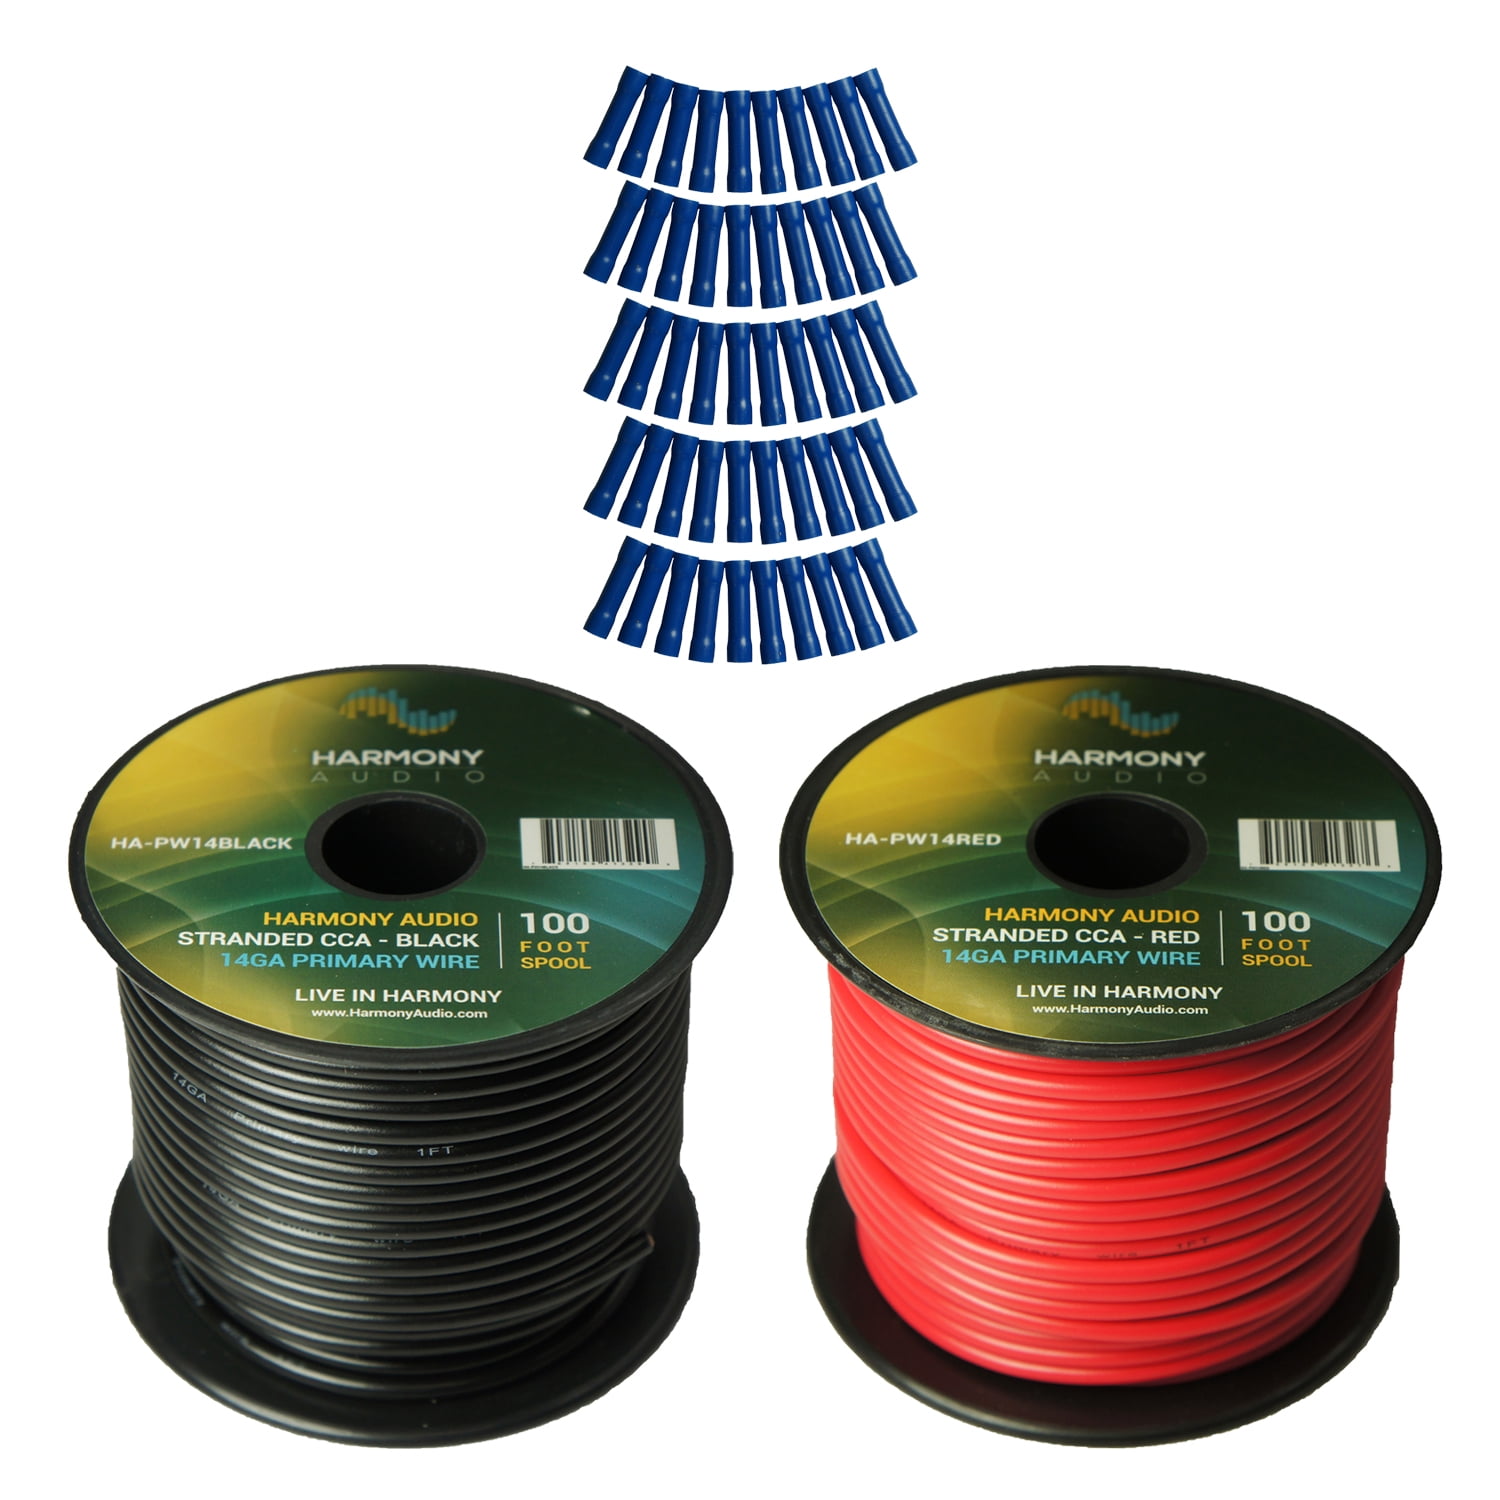 12 GA GAUGE 2 Roll Pack 100 FT SPOOLS VEHICLE POWER GROUND RED BLACK WIRE CABLE